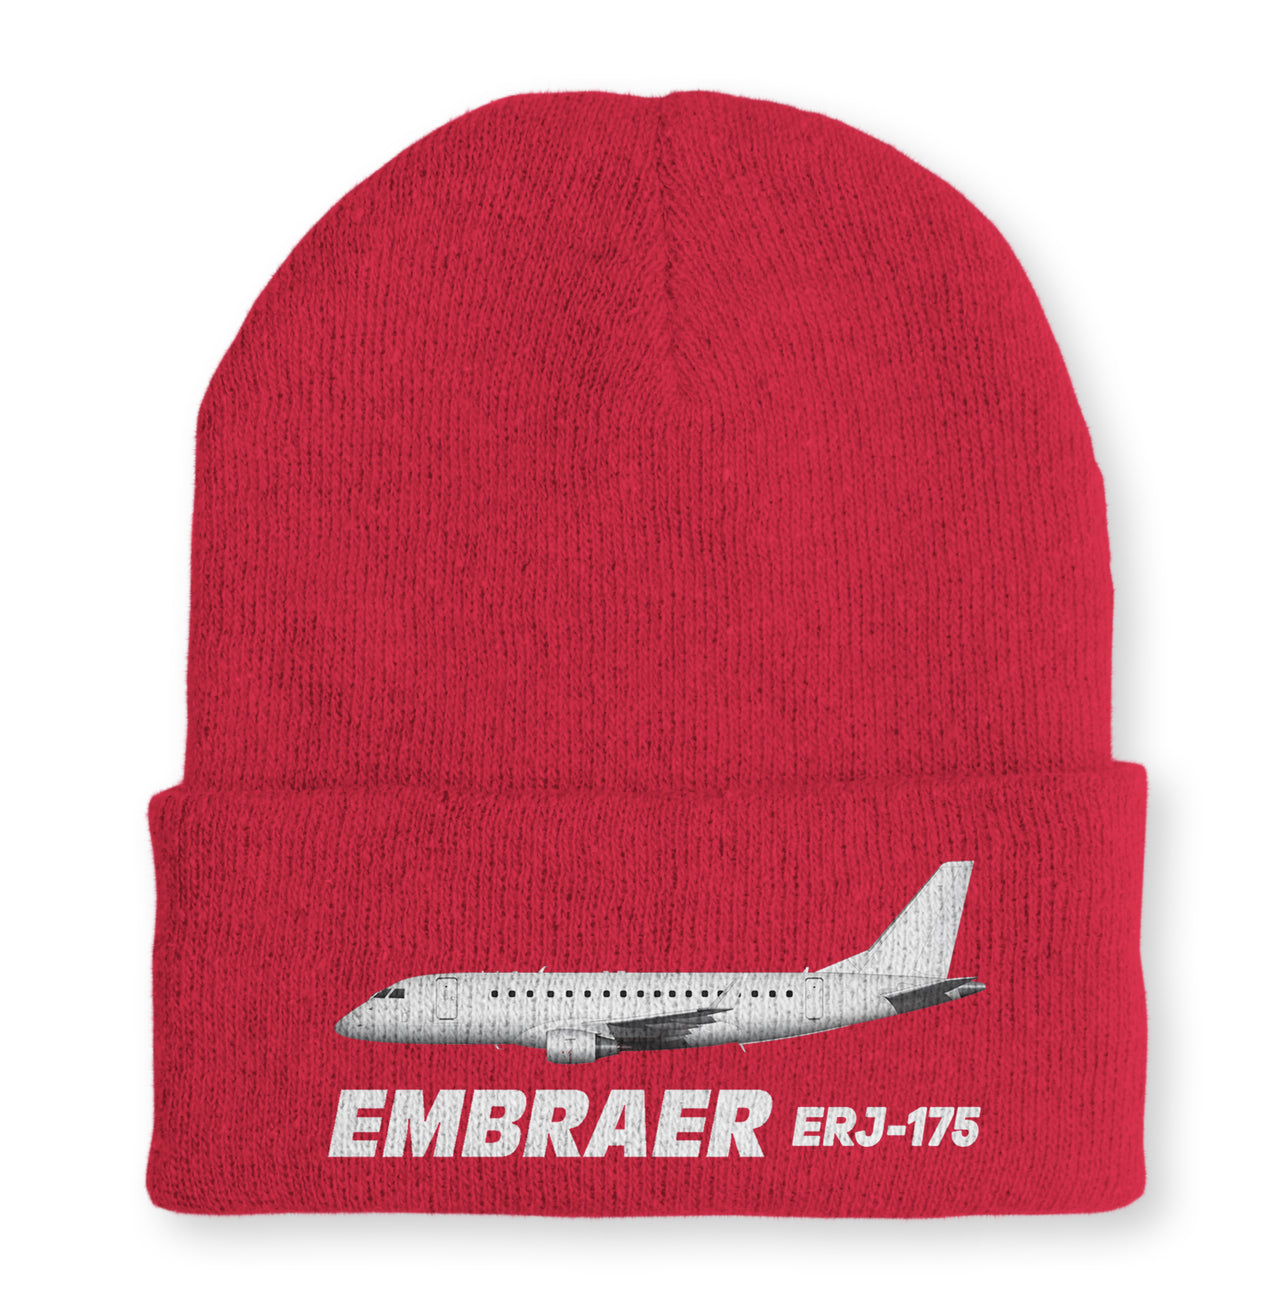 The Embraer ERJ-175 Embroidered Beanies